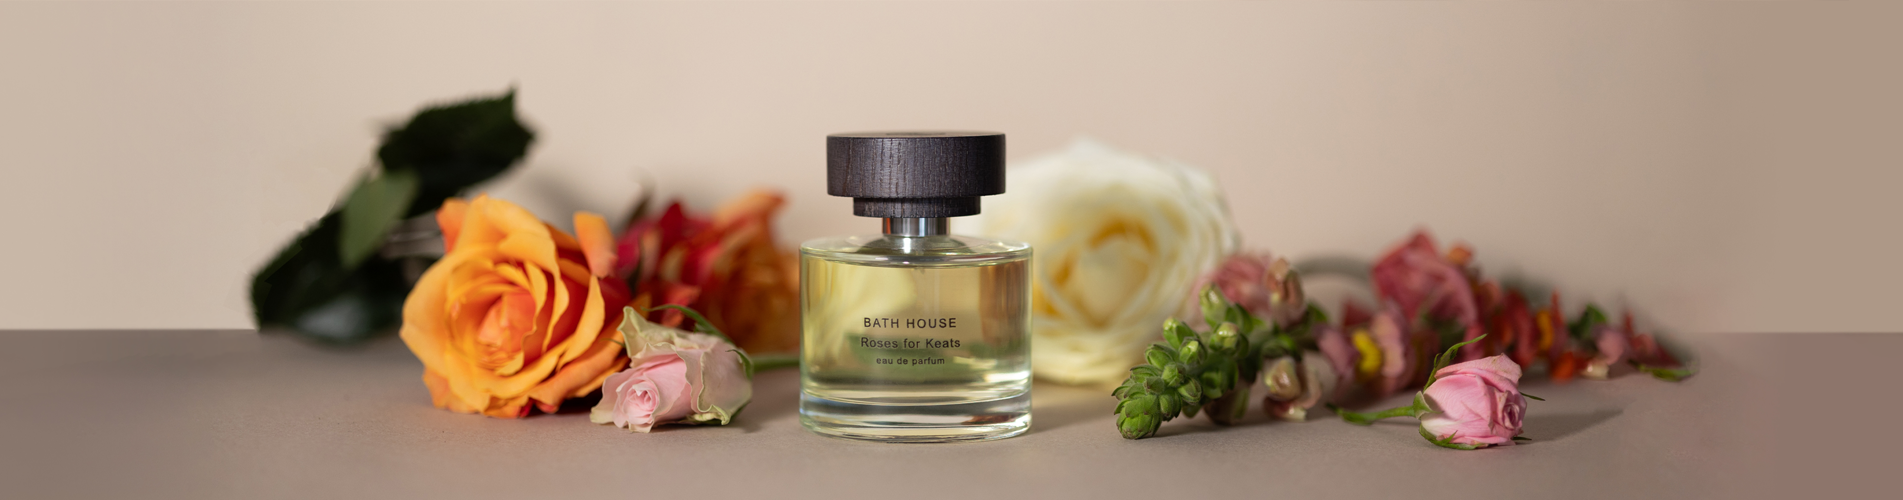 Banner Image Of The Floral Fragrance Product Category